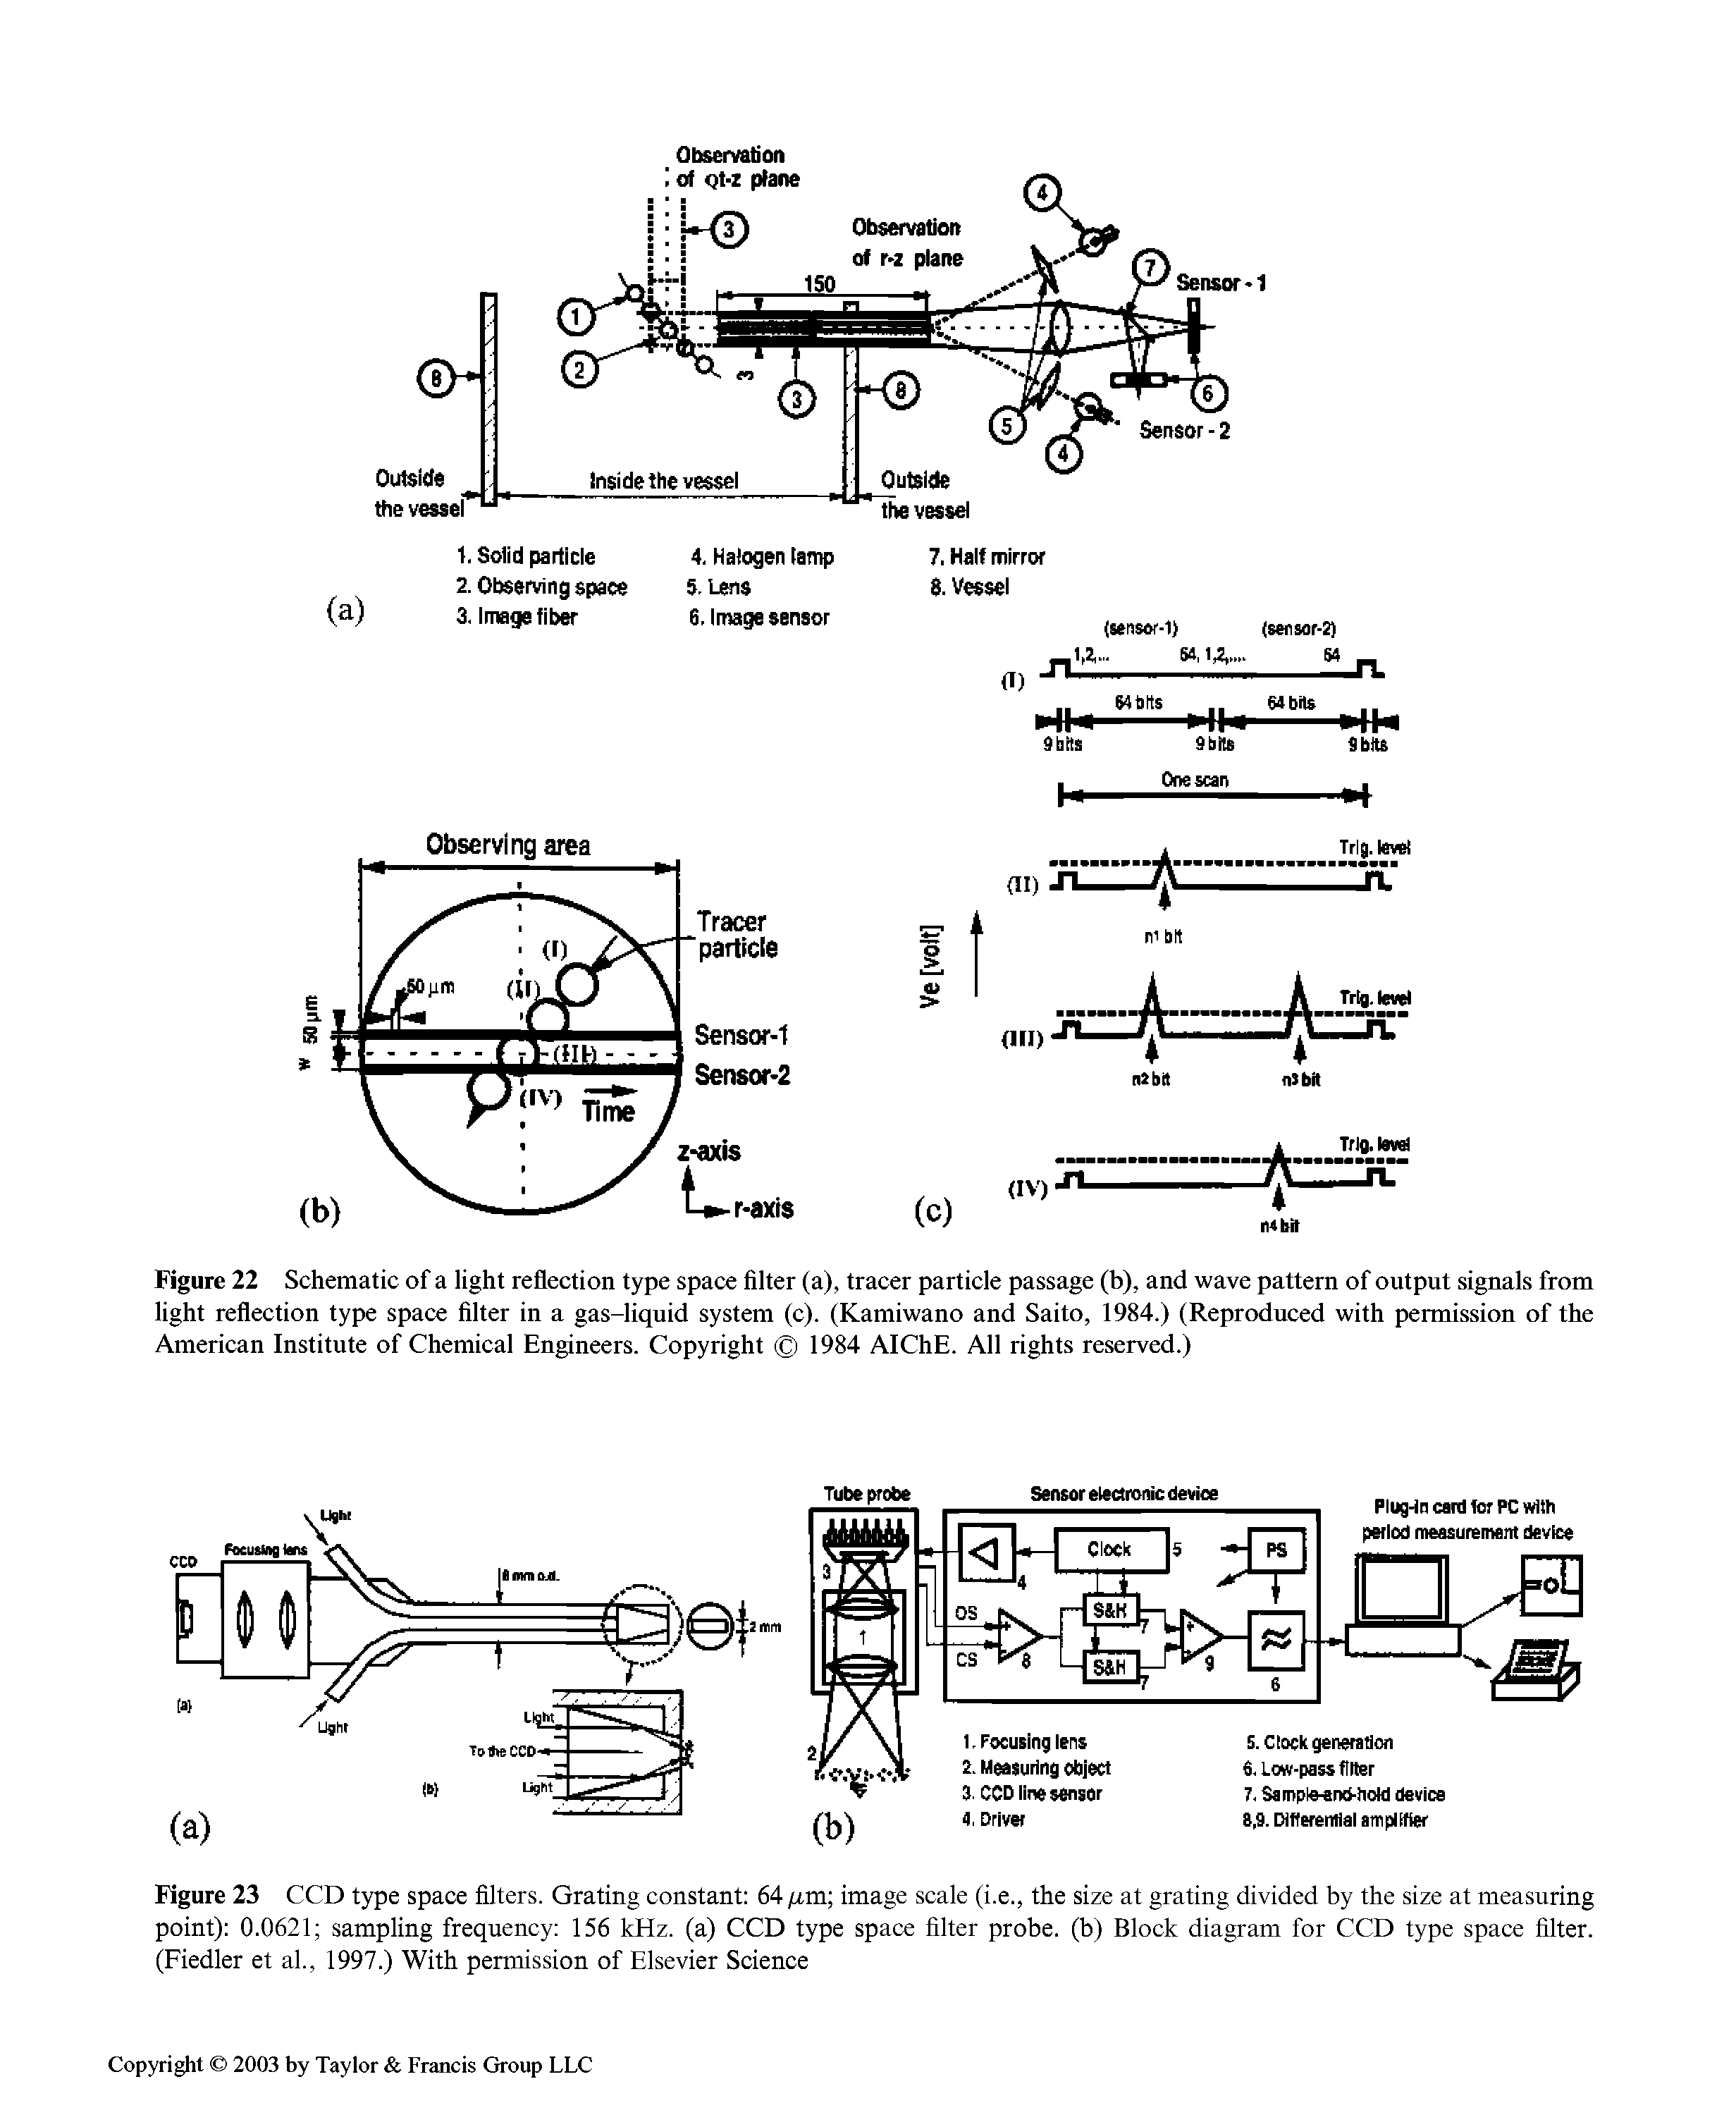 Figure 22 Schematic of a light reflection type space filter (a), tracer particle passage (b), and wave pattern of output signals from light reflection type space filter in a gas-liquid system (c). (Kamiwano and Saito, 1984.) (Reproduced with permission of the American Institute of Chemical Engineers. Copyright 1984 AIChE. All rights reserved.)...